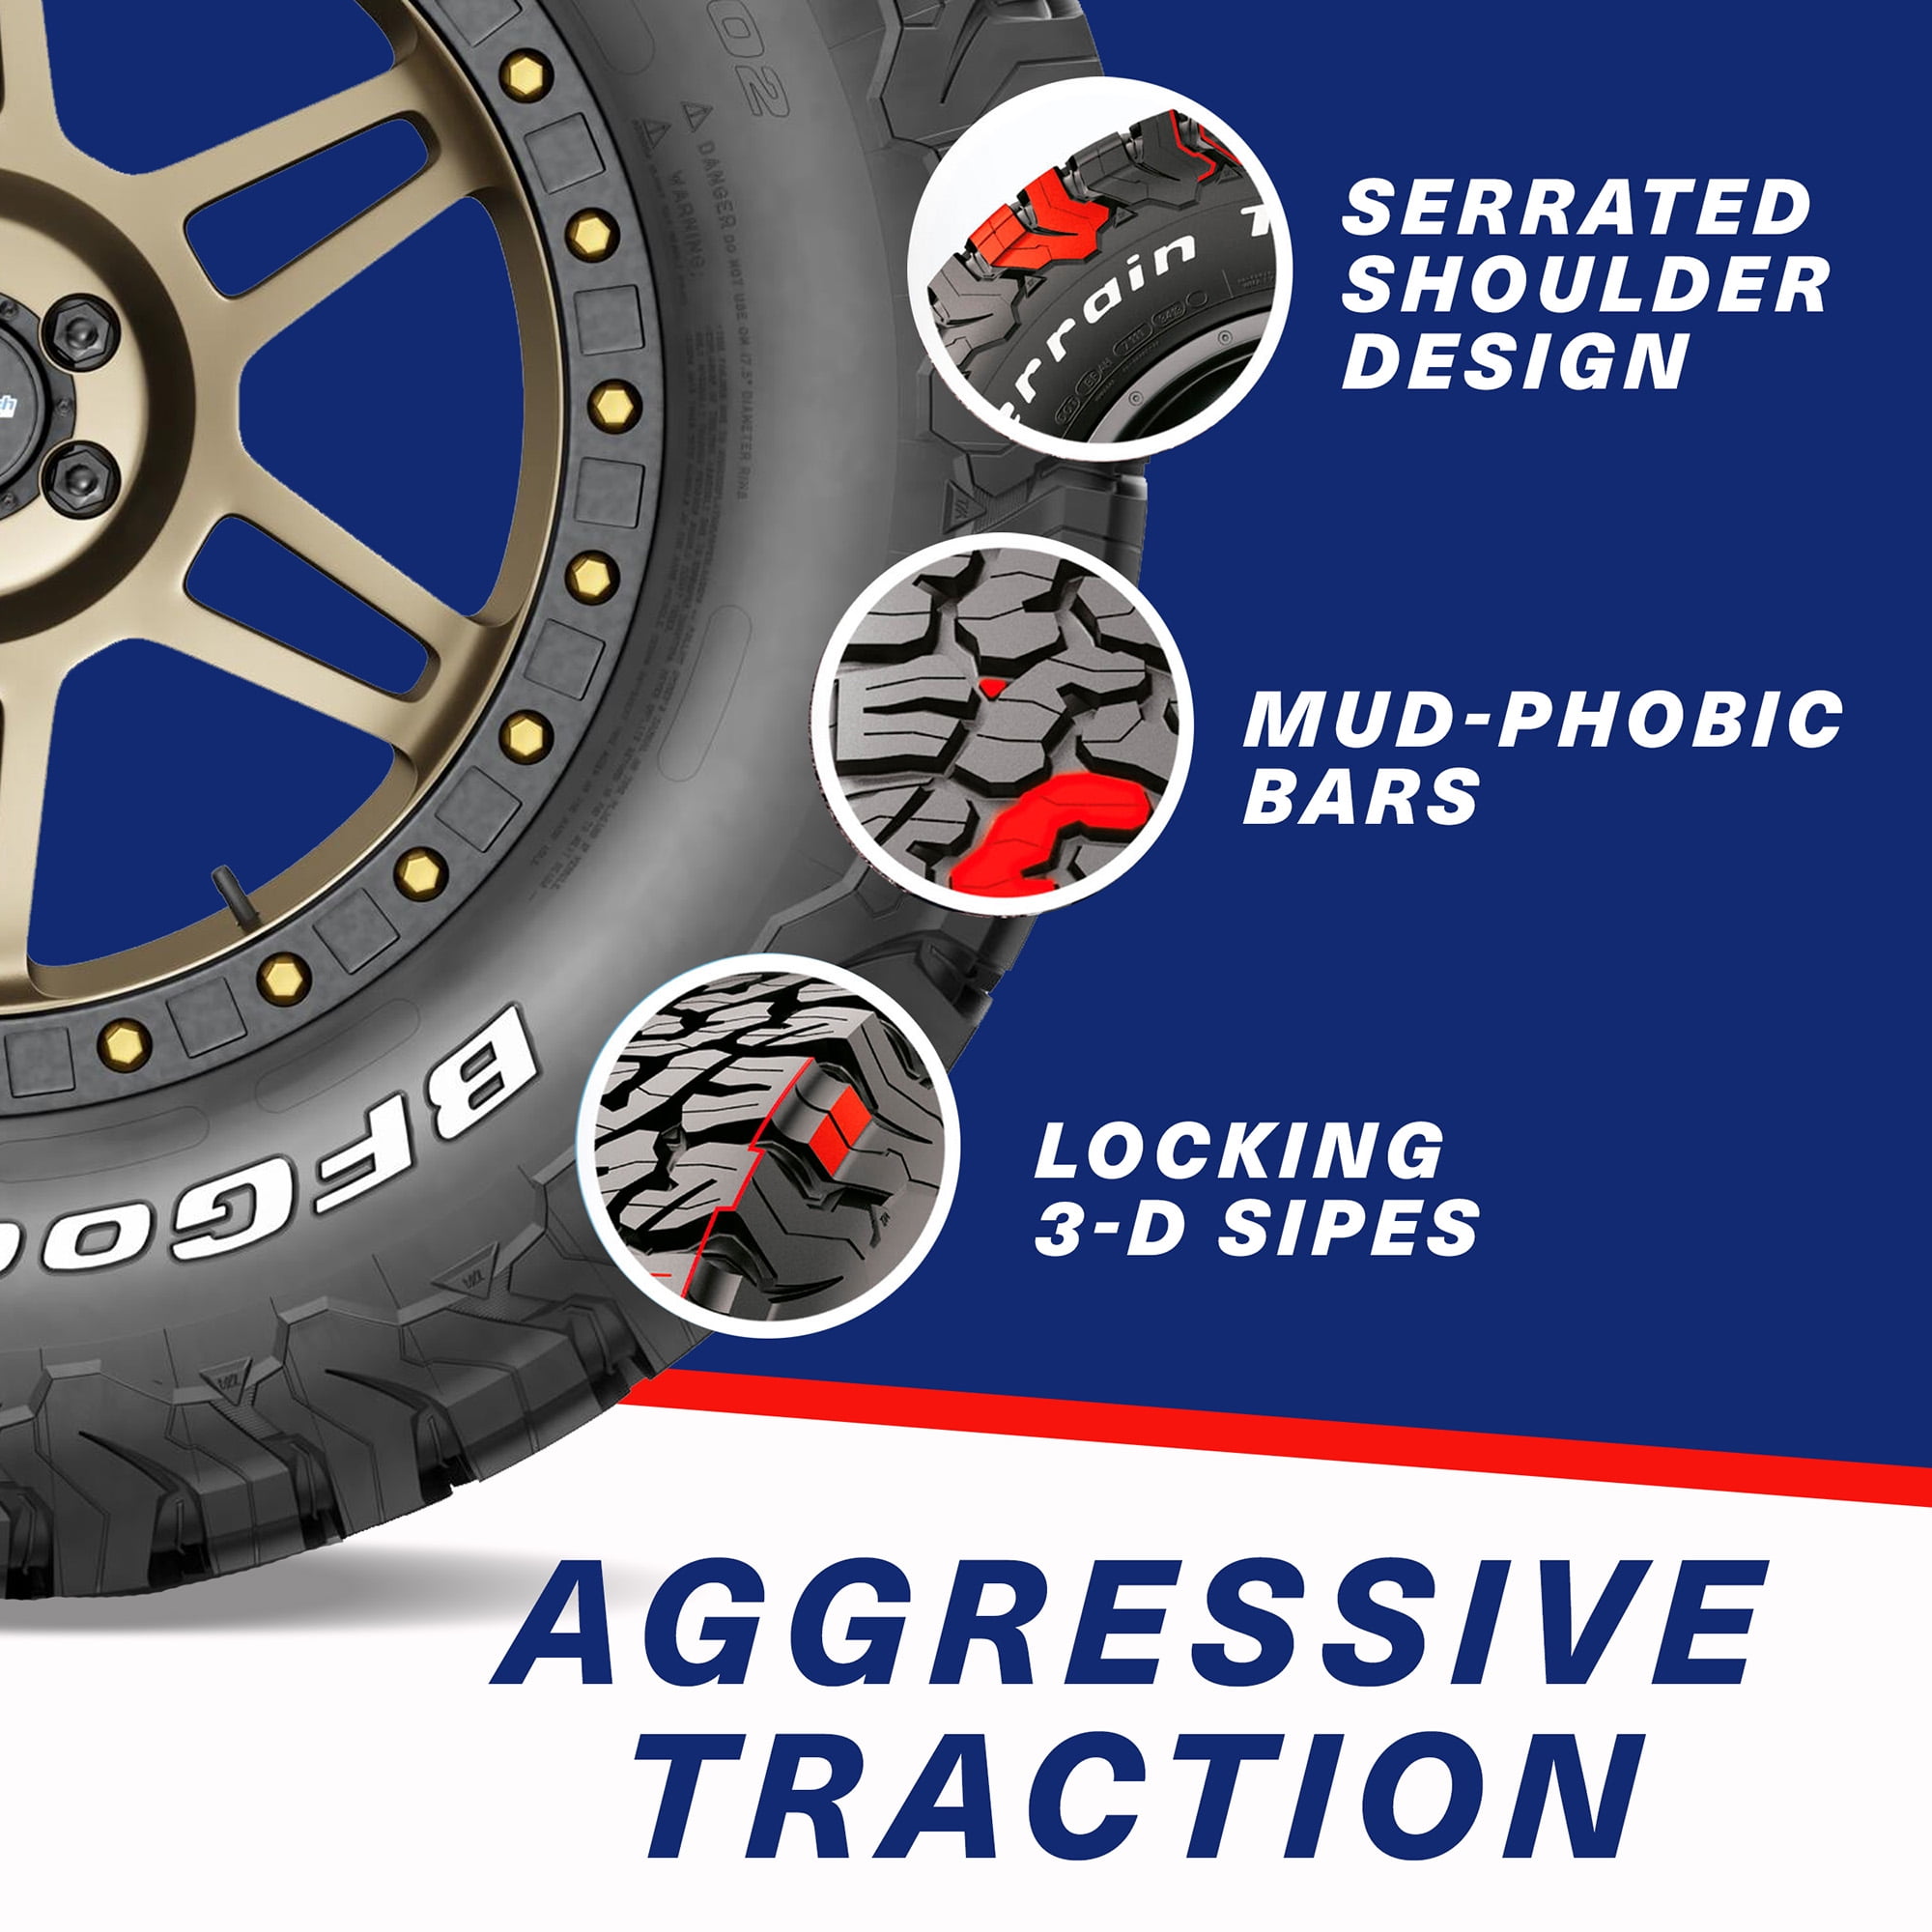 SET of 4 "GOODYEAR" TIRES for X-Tractions $2.00 Shipping etc Brand new 